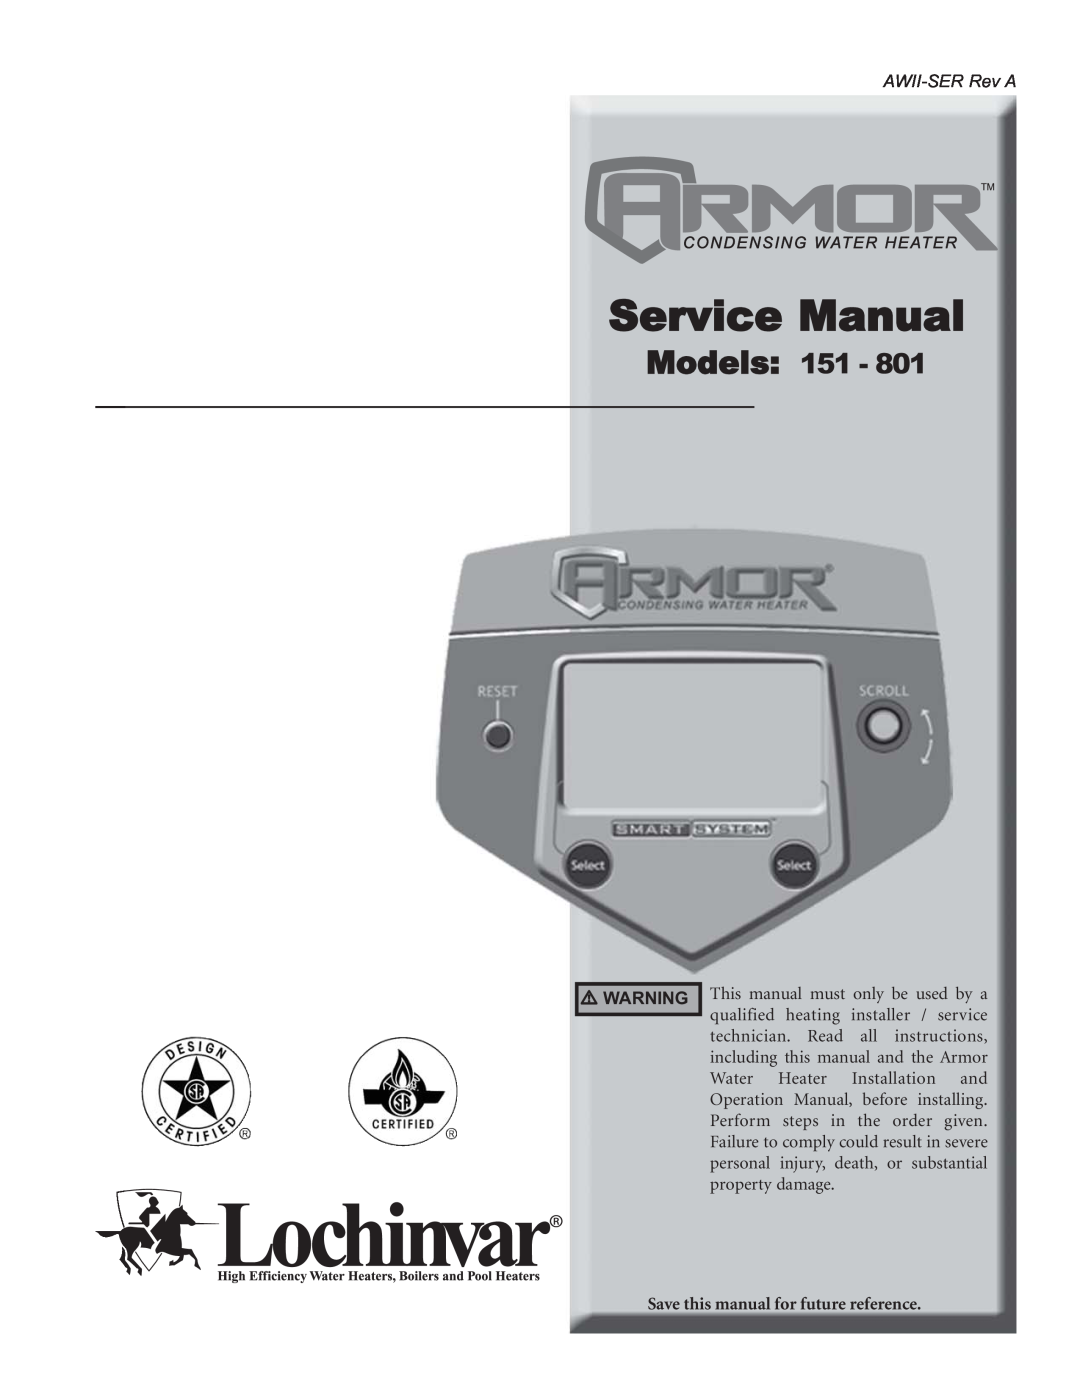 Lochinvar 151 - 801 service manual Models, AWII-SERRev A, Save this manual for future reference 